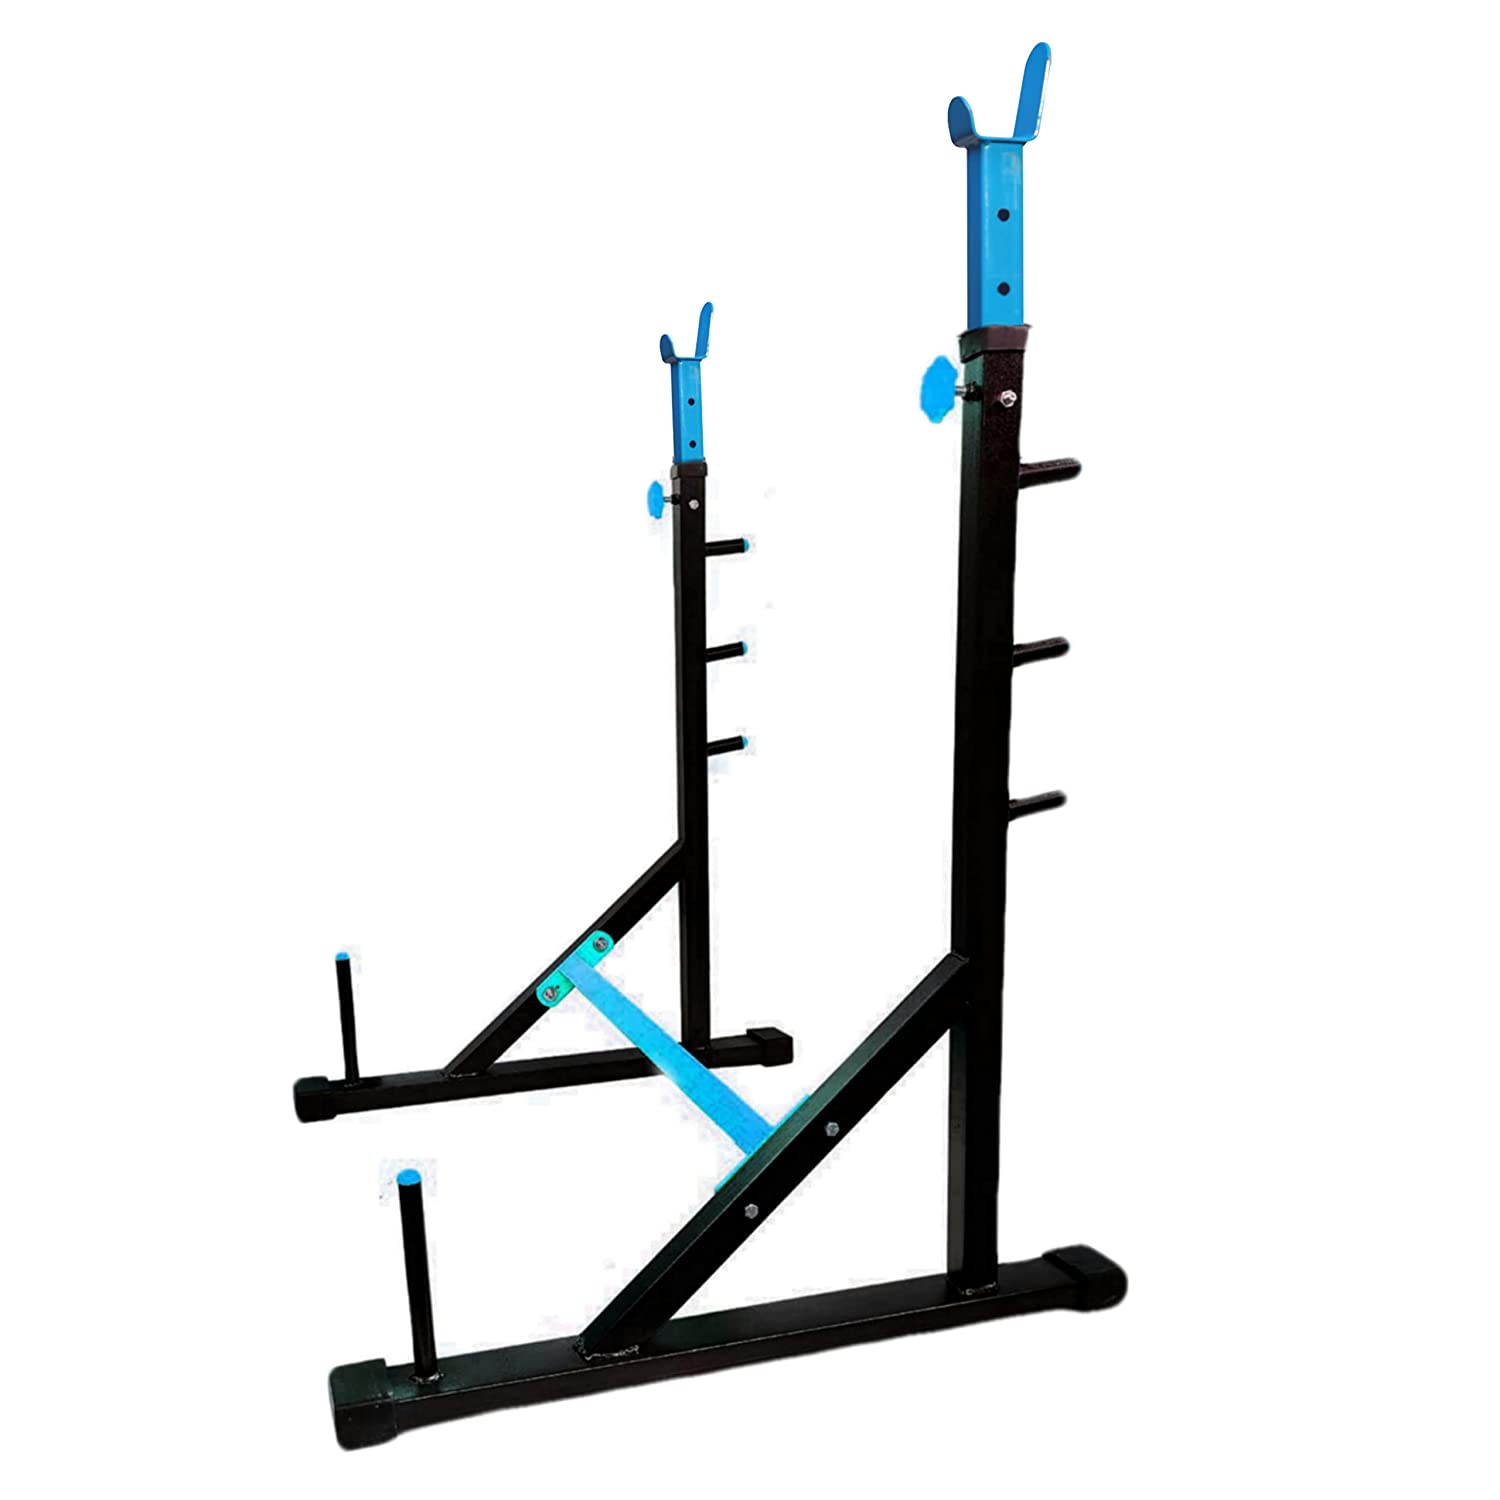 SquatRack Stand - Workout Equipment for Men & Women